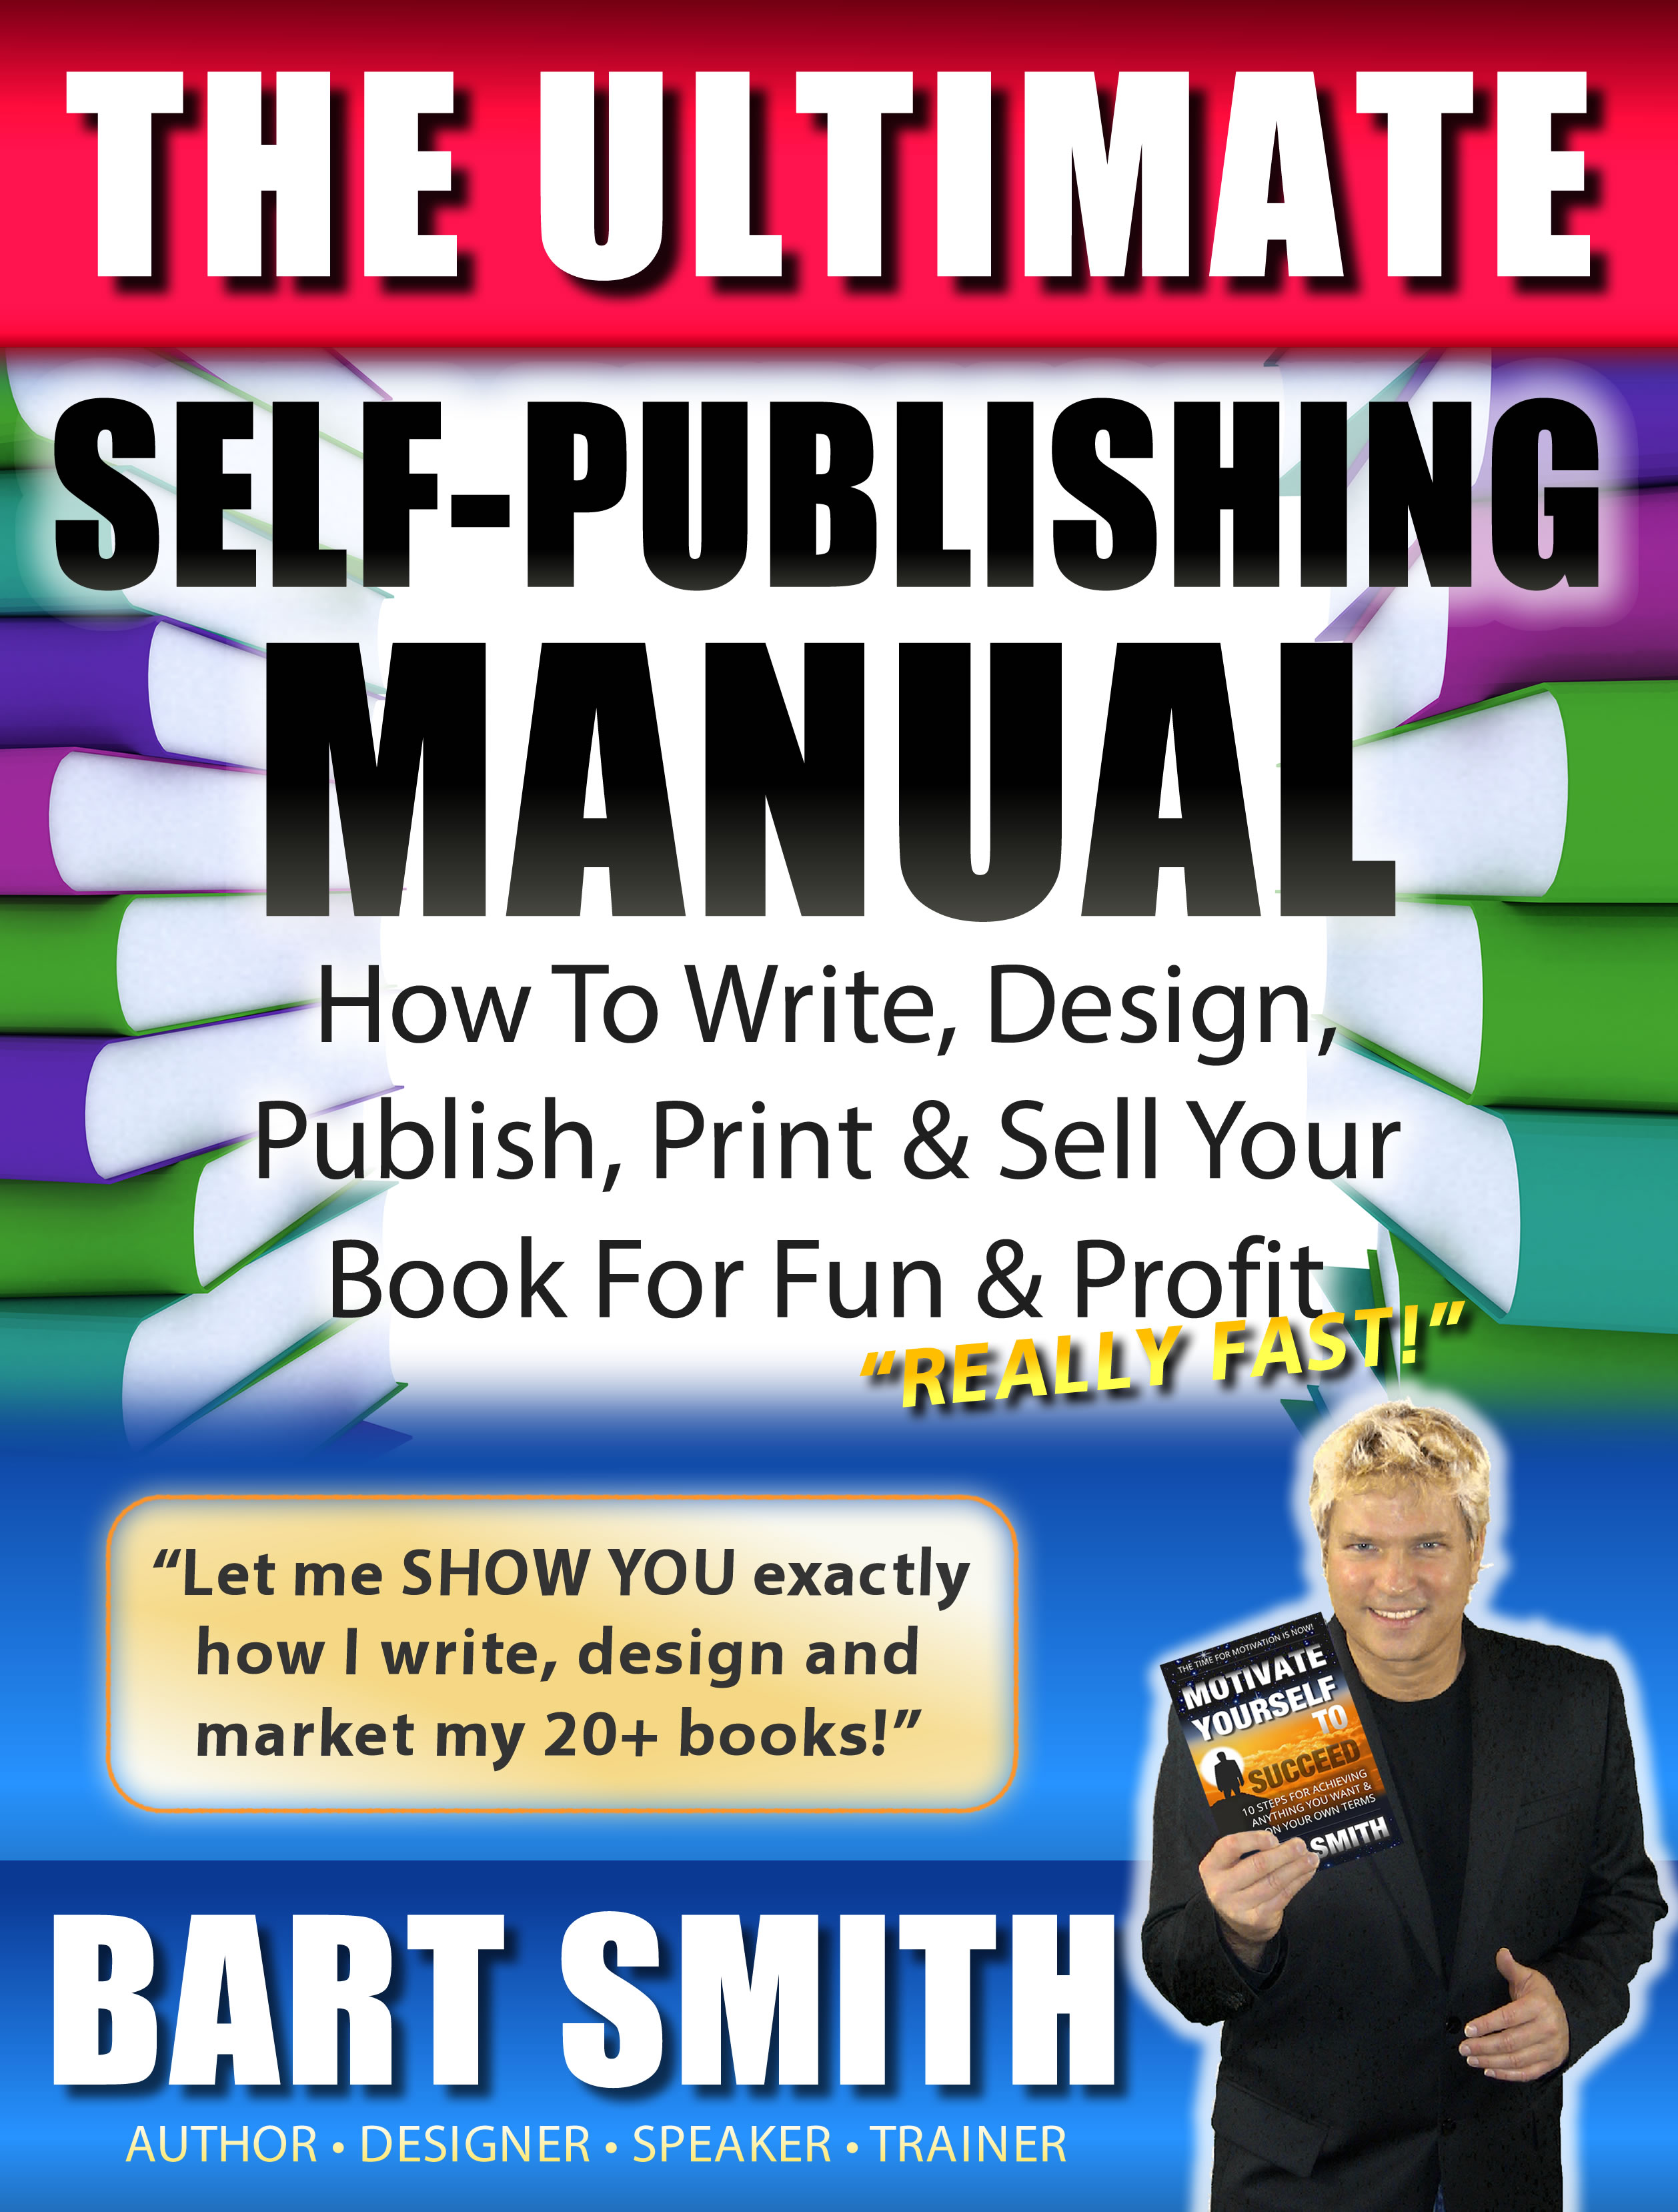 THE ULTIMATE Self-Publishing Manual  by Bart Smith